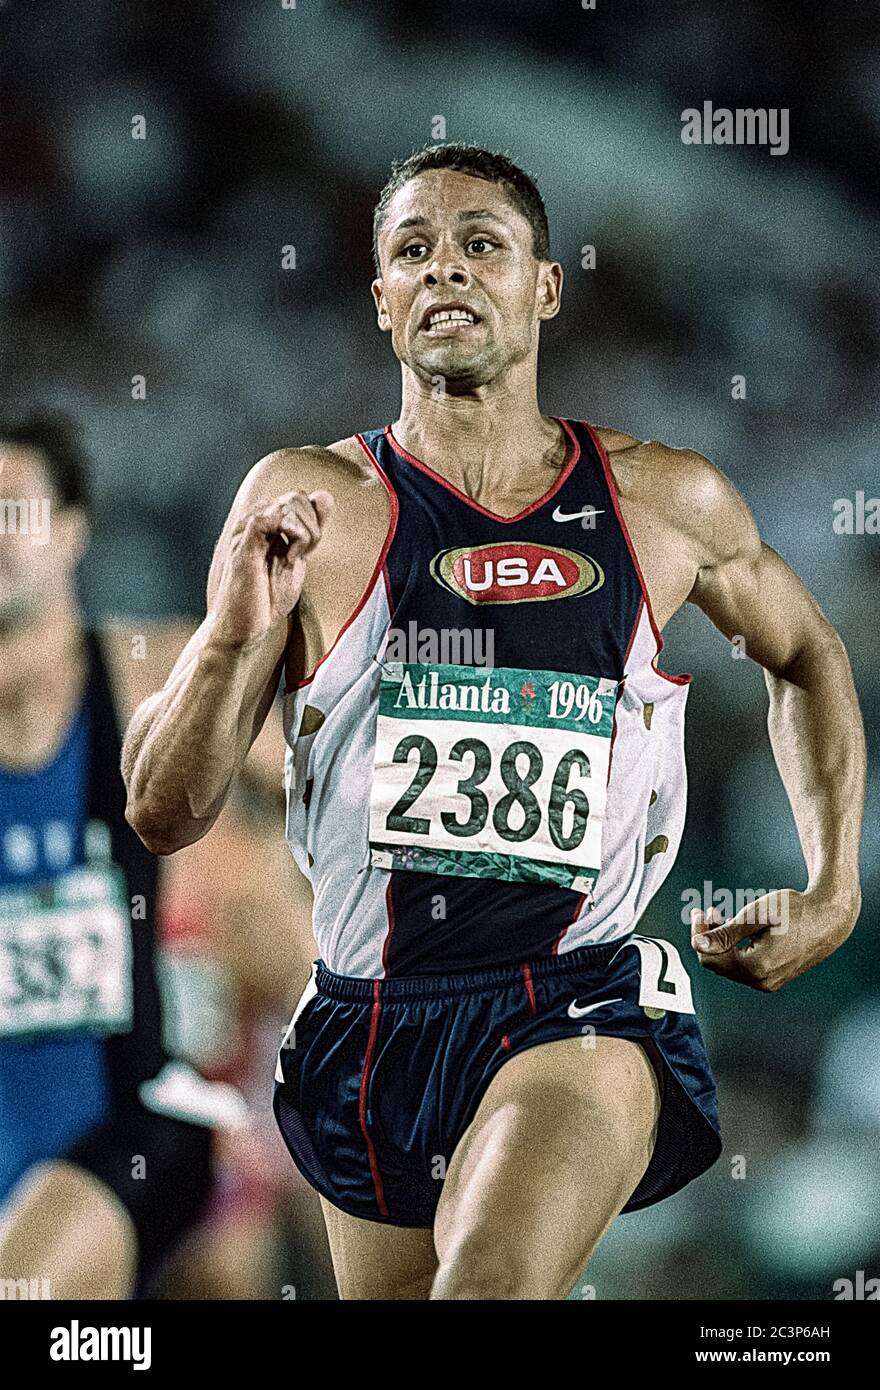 Dan O'Brien (USA) competing in the  decathlon at the 1996  OLympic Summer Games Stock Photo